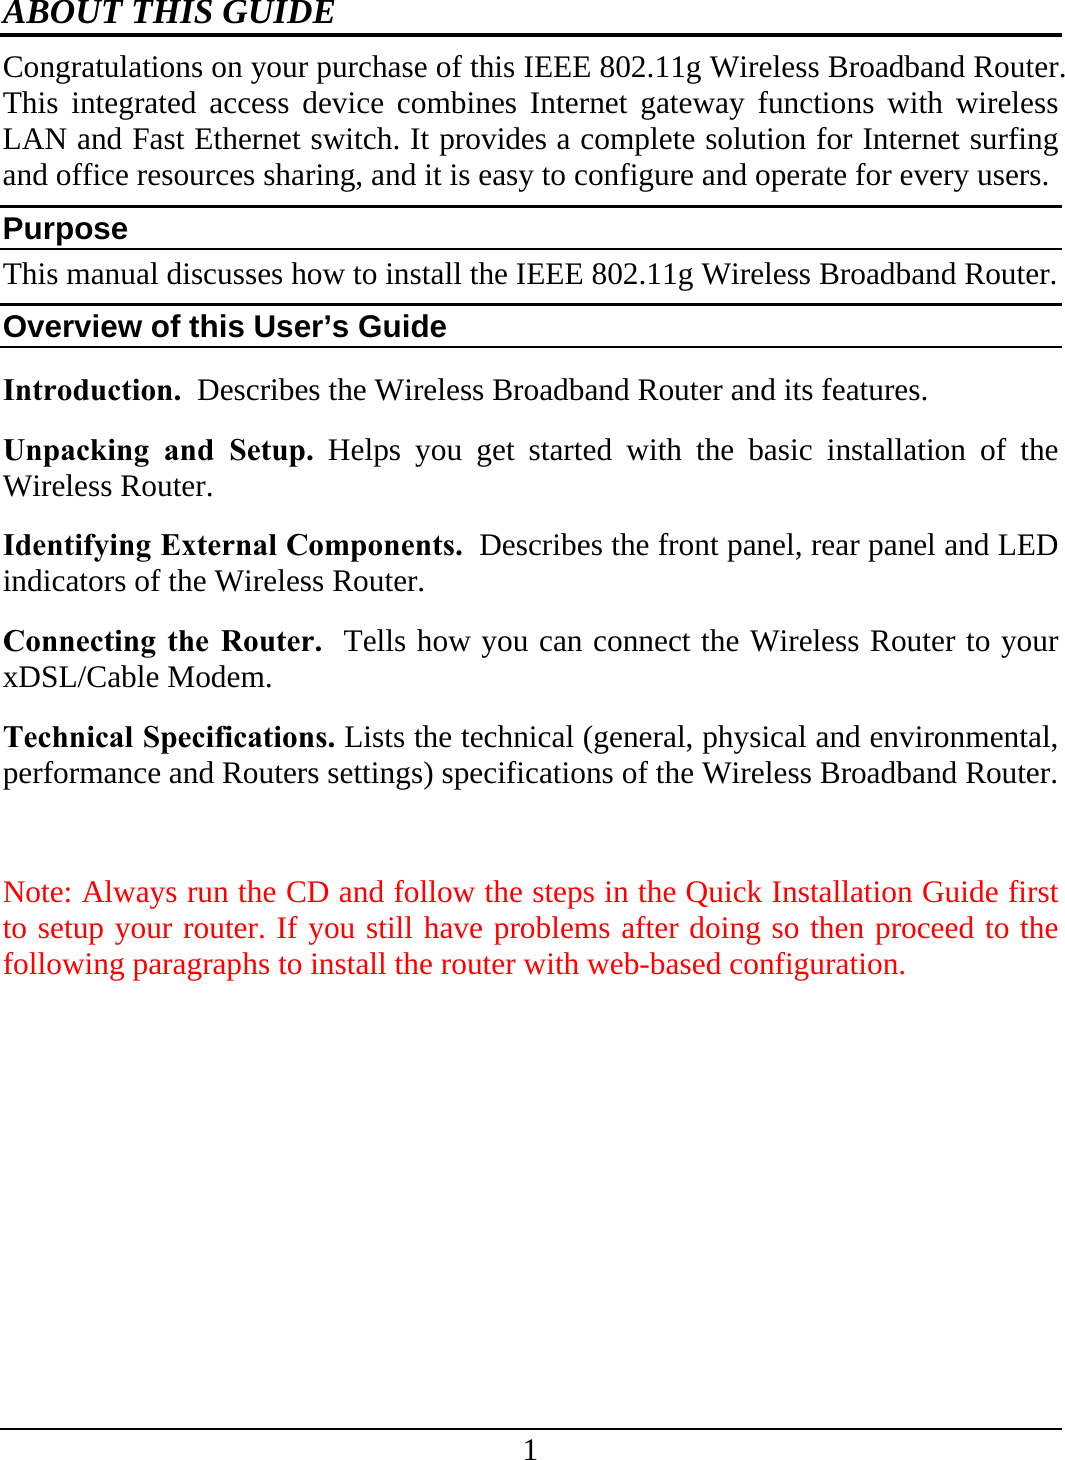 1 ABOUT THIS GUIDE Congratulations on your purchase of this IEEE 802.11g Wireless Broadband Router. This integrated access device combines Internet gateway functions with wireless LAN and Fast Ethernet switch. It provides a complete solution for Internet surfing and office resources sharing, and it is easy to configure and operate for every users. Purpose This manual discusses how to install the IEEE 802.11g Wireless Broadband Router.  Overview of this User’s Guide Introduction.  Describes the Wireless Broadband Router and its features. Unpacking and Setup. Helps you get started with the basic installation of the Wireless Router. Identifying External Components.  Describes the front panel, rear panel and LED indicators of the Wireless Router. Connecting the Router.  Tells how you can connect the Wireless Router to your xDSL/Cable Modem. Technical Specifications. Lists the technical (general, physical and environmental, performance and Routers settings) specifications of the Wireless Broadband Router.  Note: Always run the CD and follow the steps in the Quick Installation Guide first to setup your router. If you still have problems after doing so then proceed to the following paragraphs to install the router with web-based configuration. 